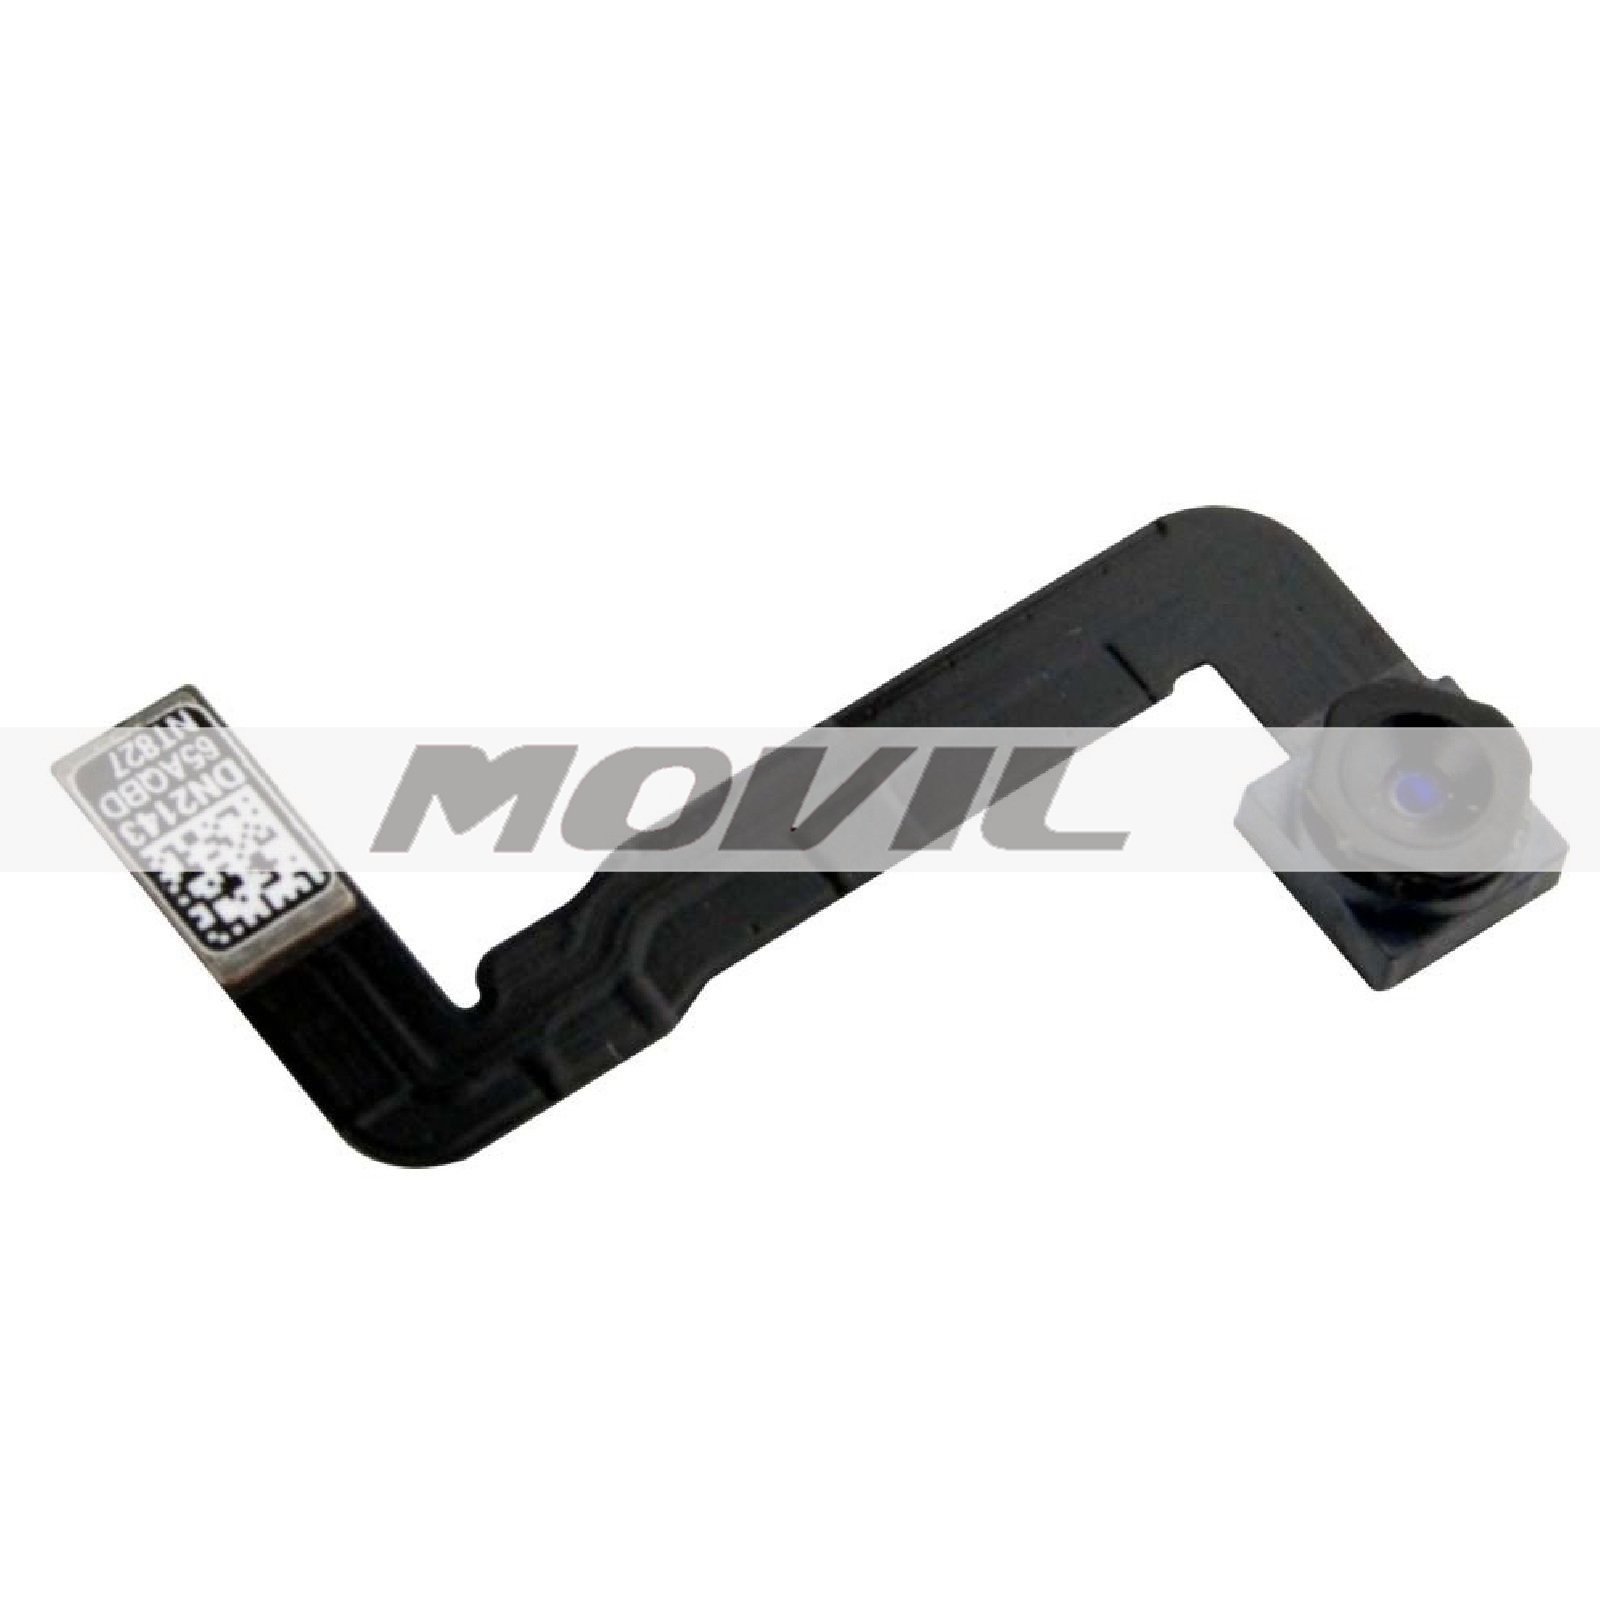 Replacement Front Facing Camera With Flex Cable For iPhone 4S